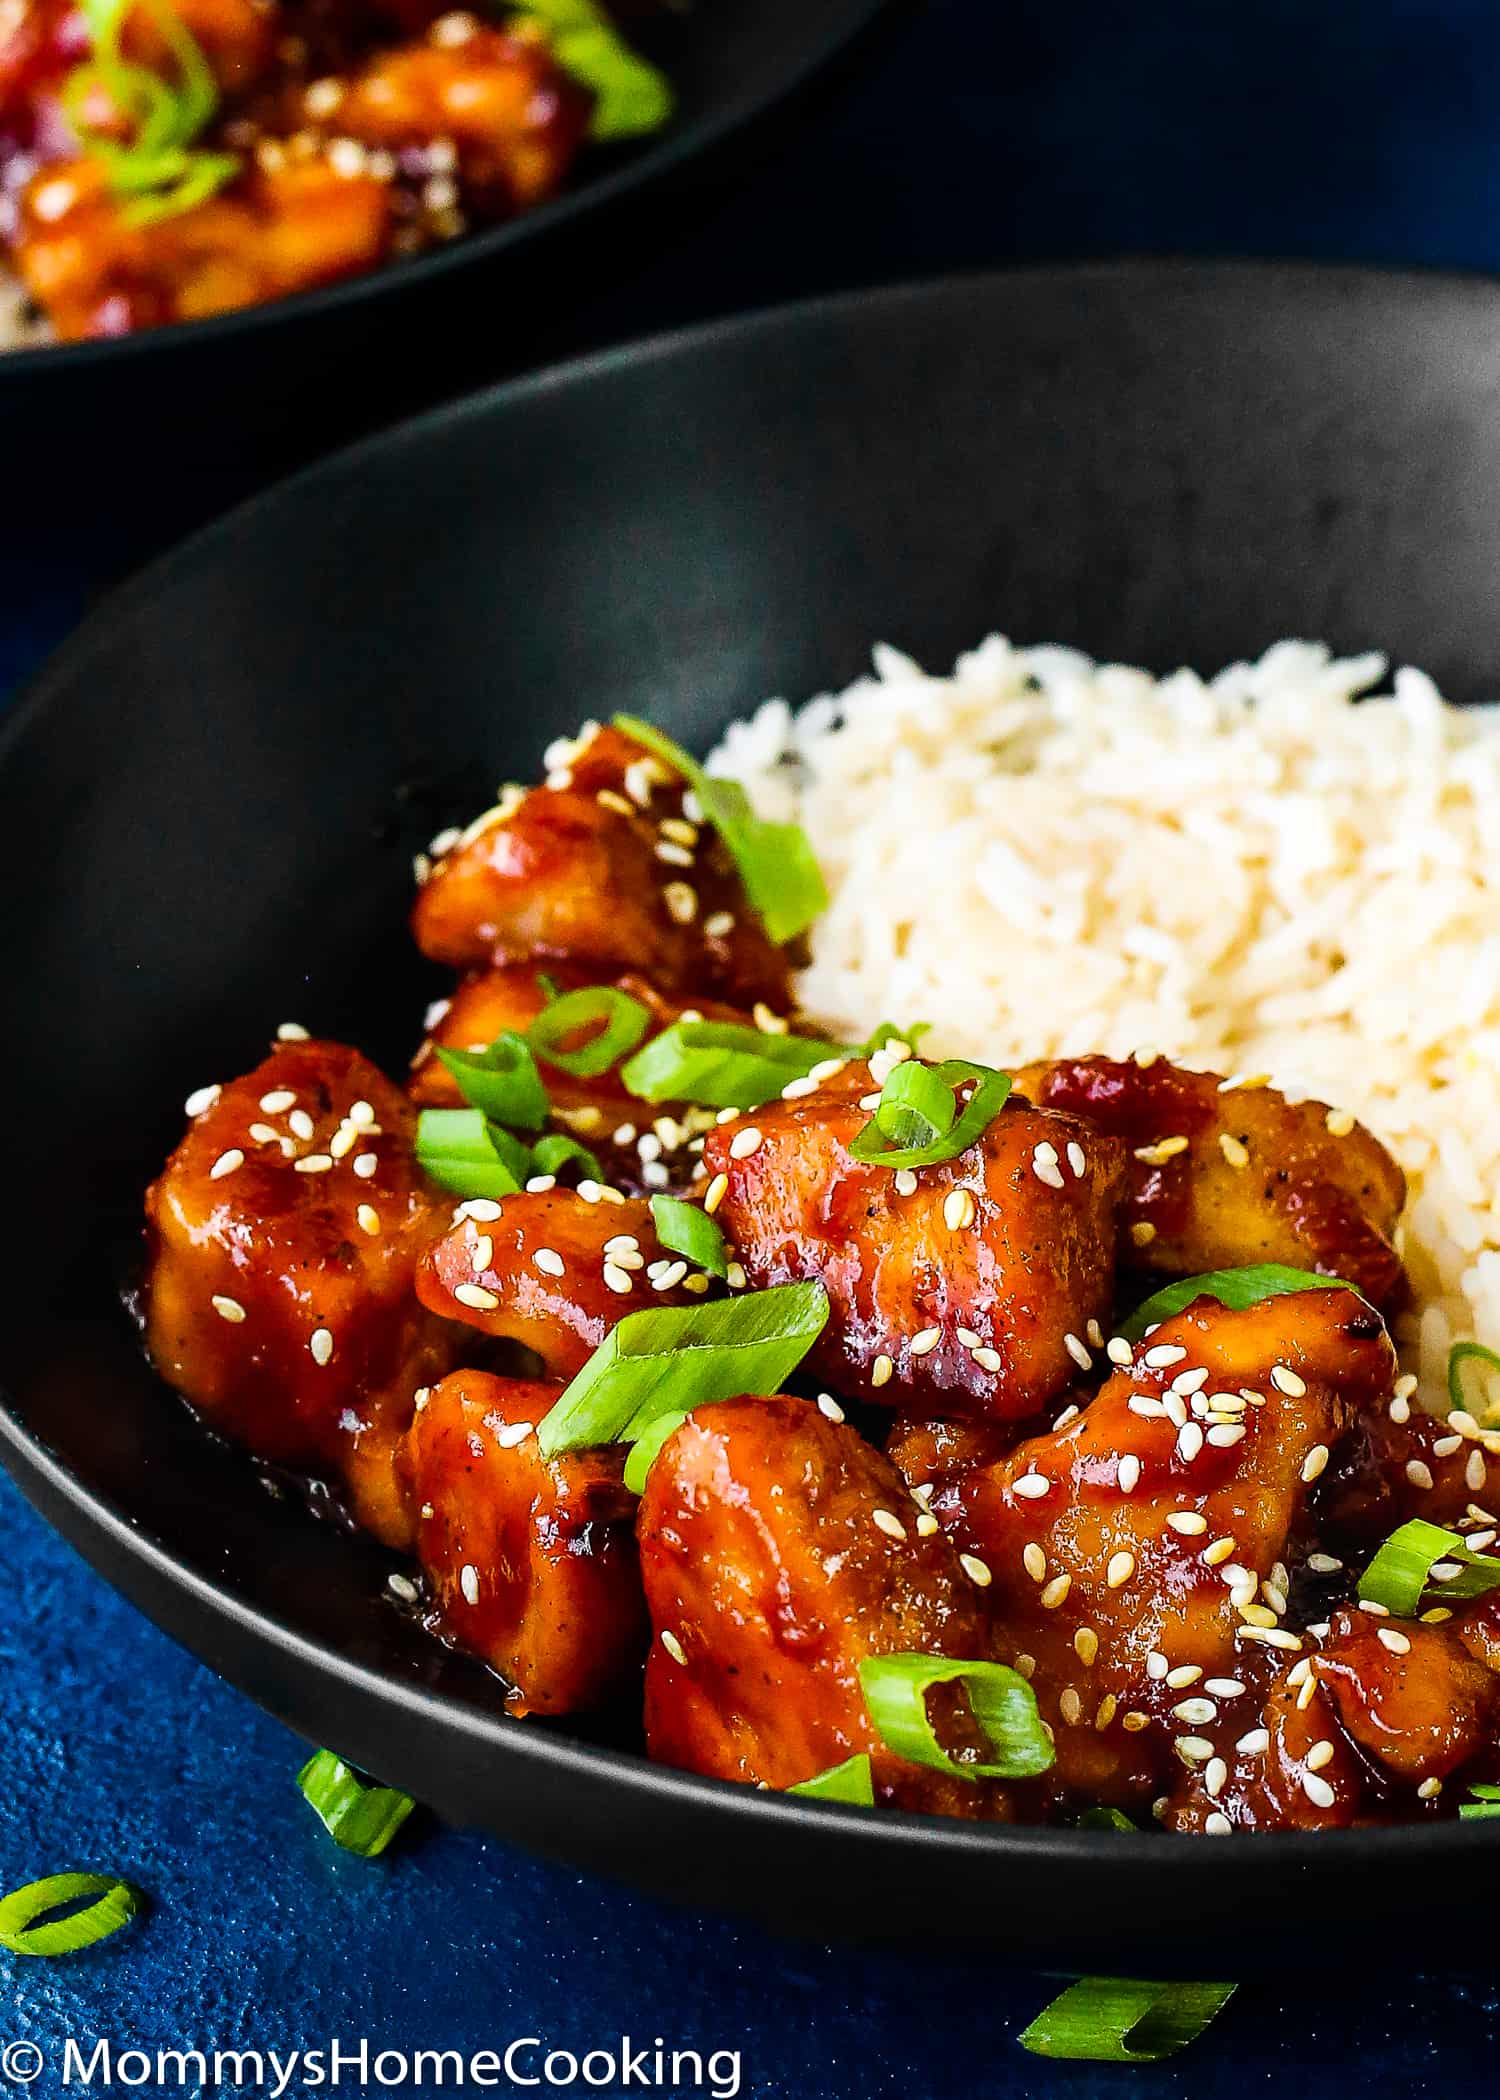 Orange Chicken with sesame seeds and green onion in a black bowl